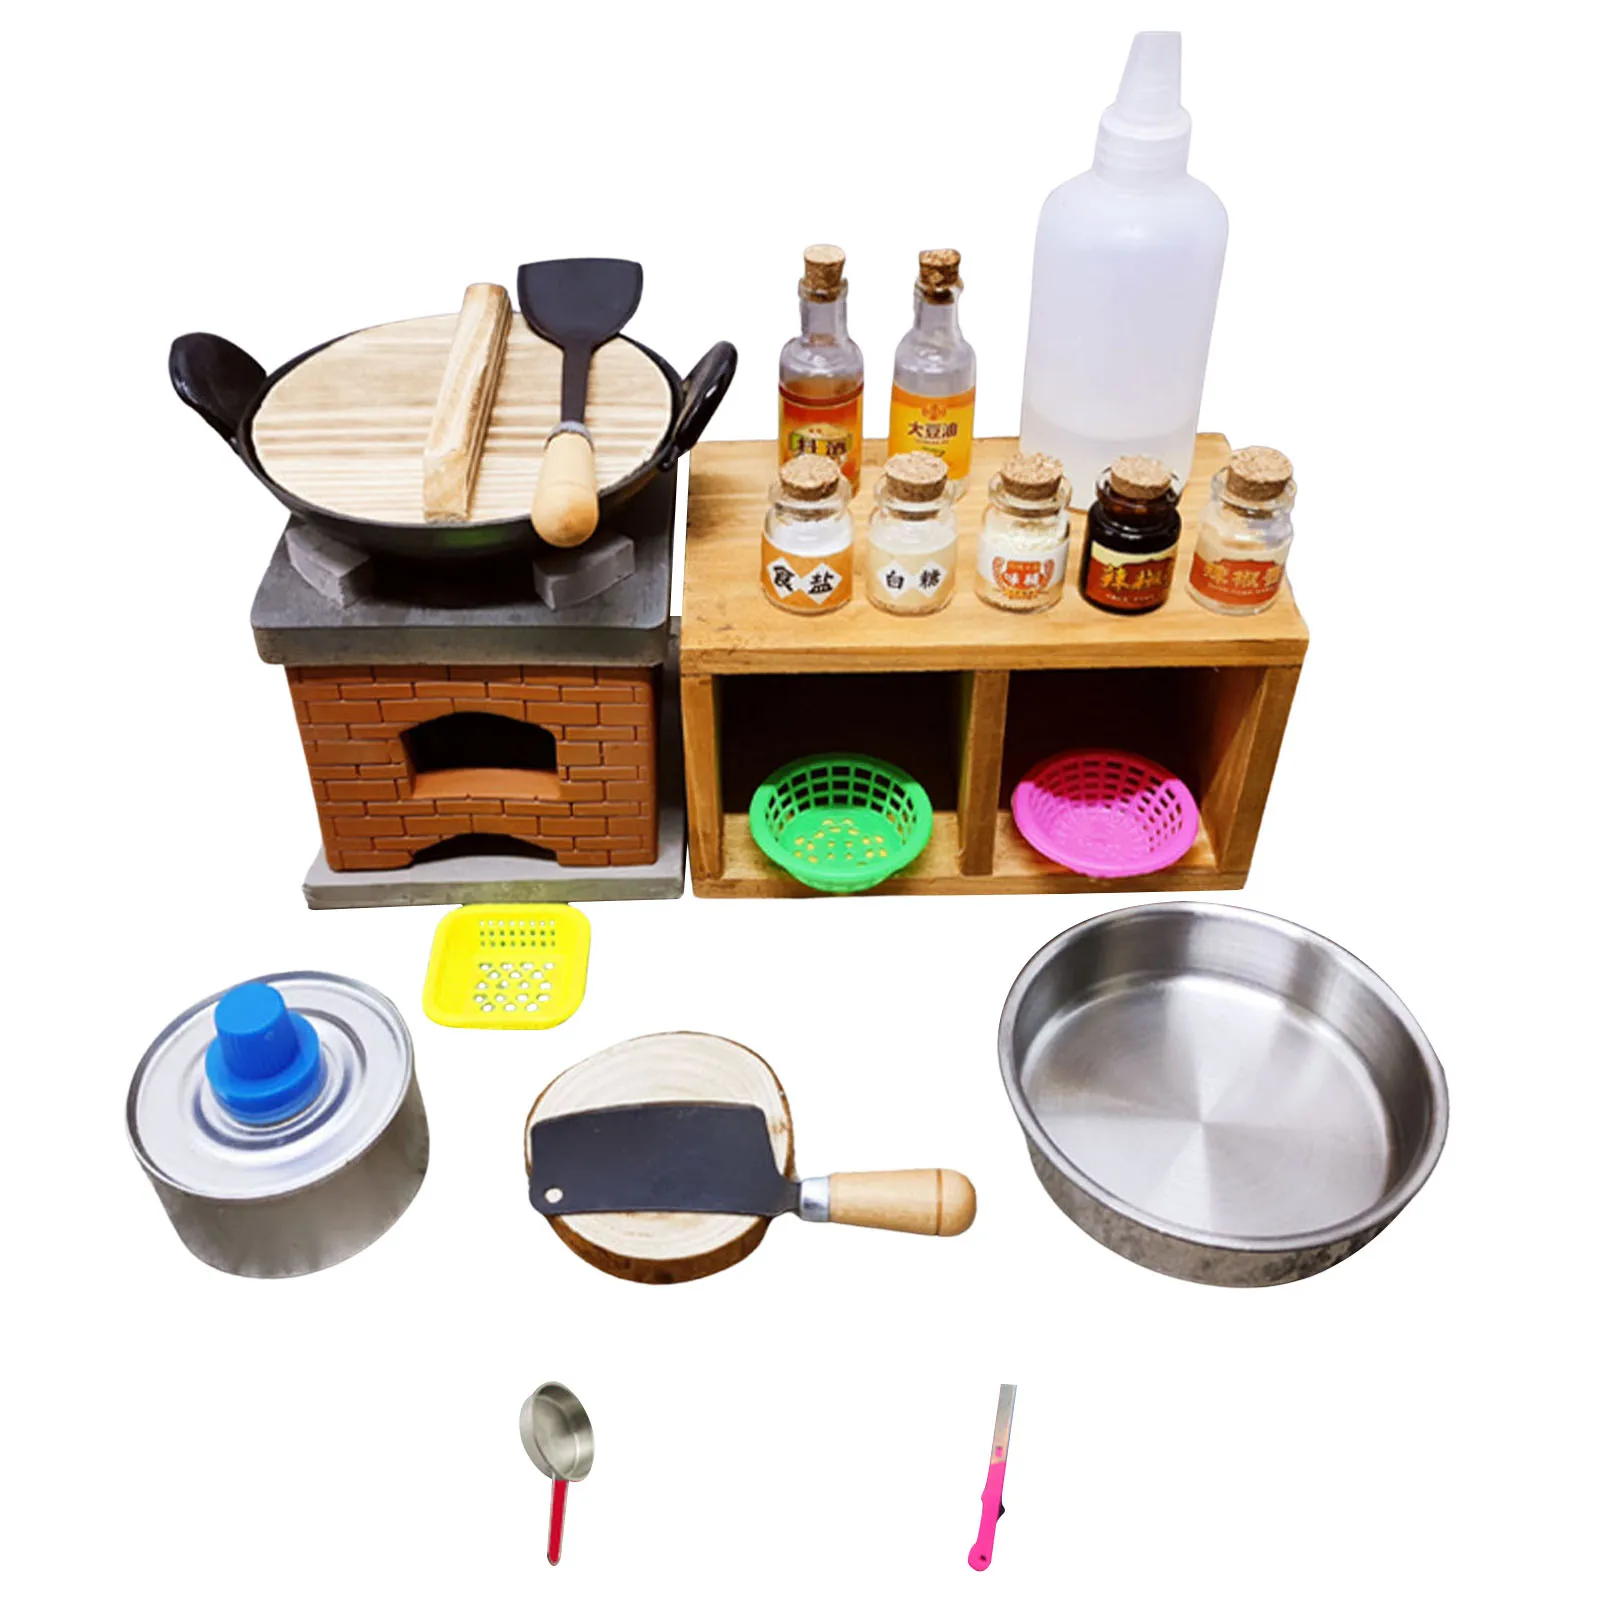 Kids Cooking Sets Real Mini Camping Cooking Utensils Pretend Games Role Play For Boys And Girls Home Decoration Birthday Gifts